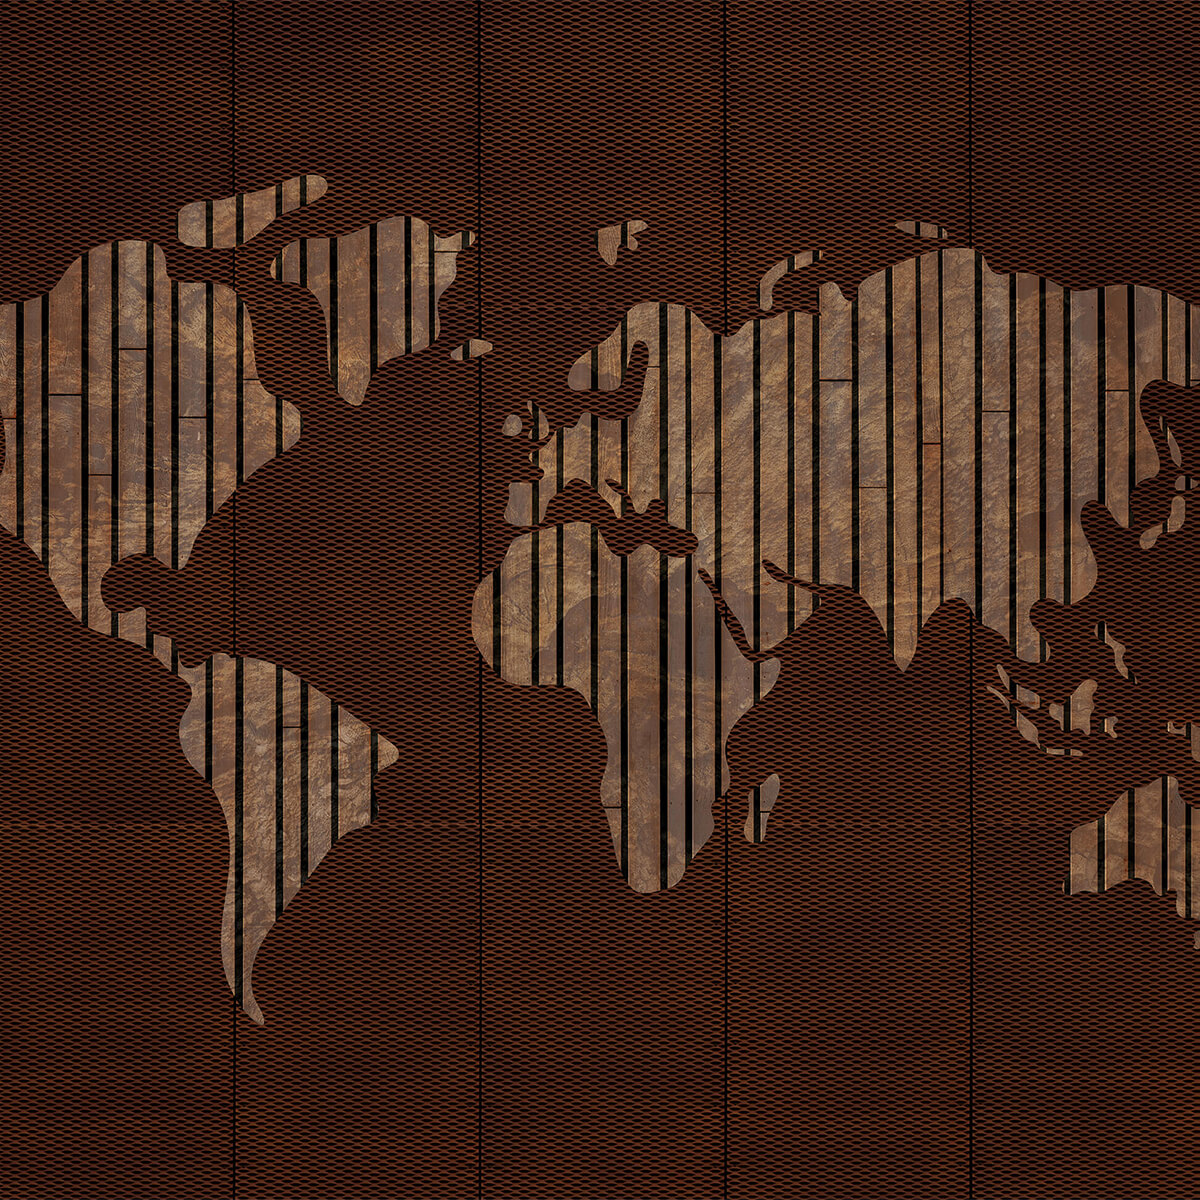 World map with wood structure